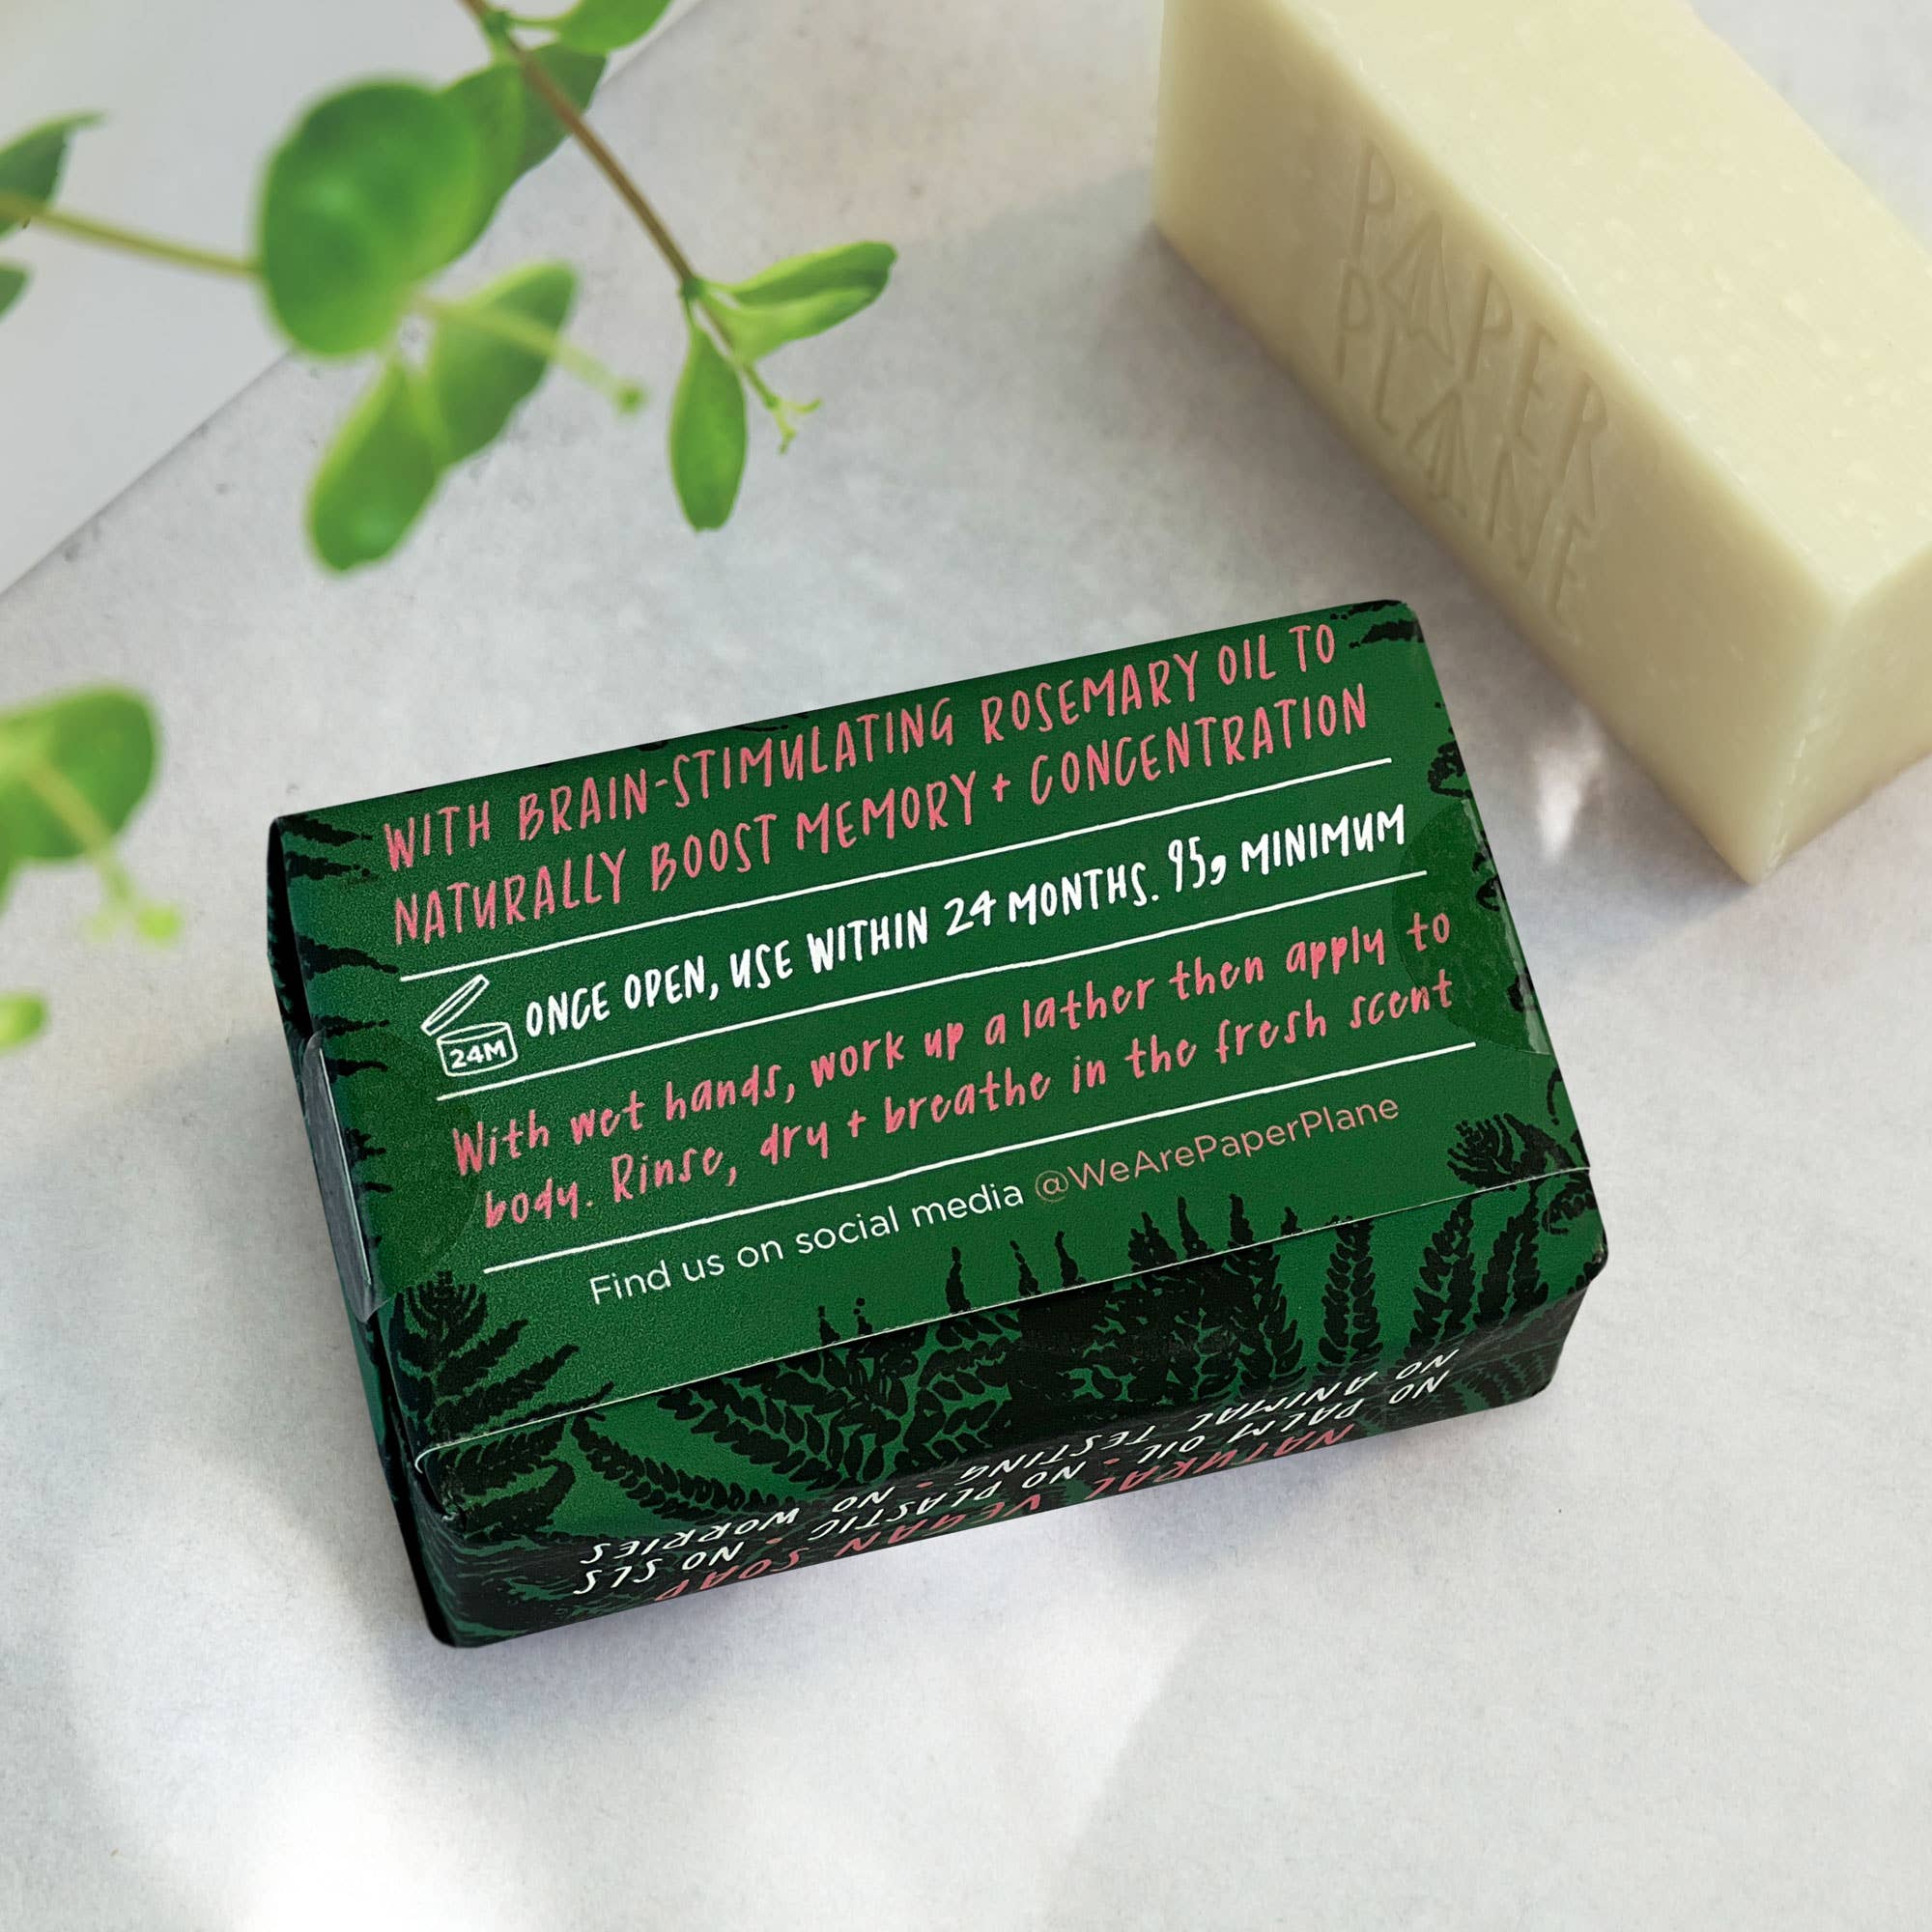 Focus Bar with Rosemary oil by Paper Plane Bar Soap